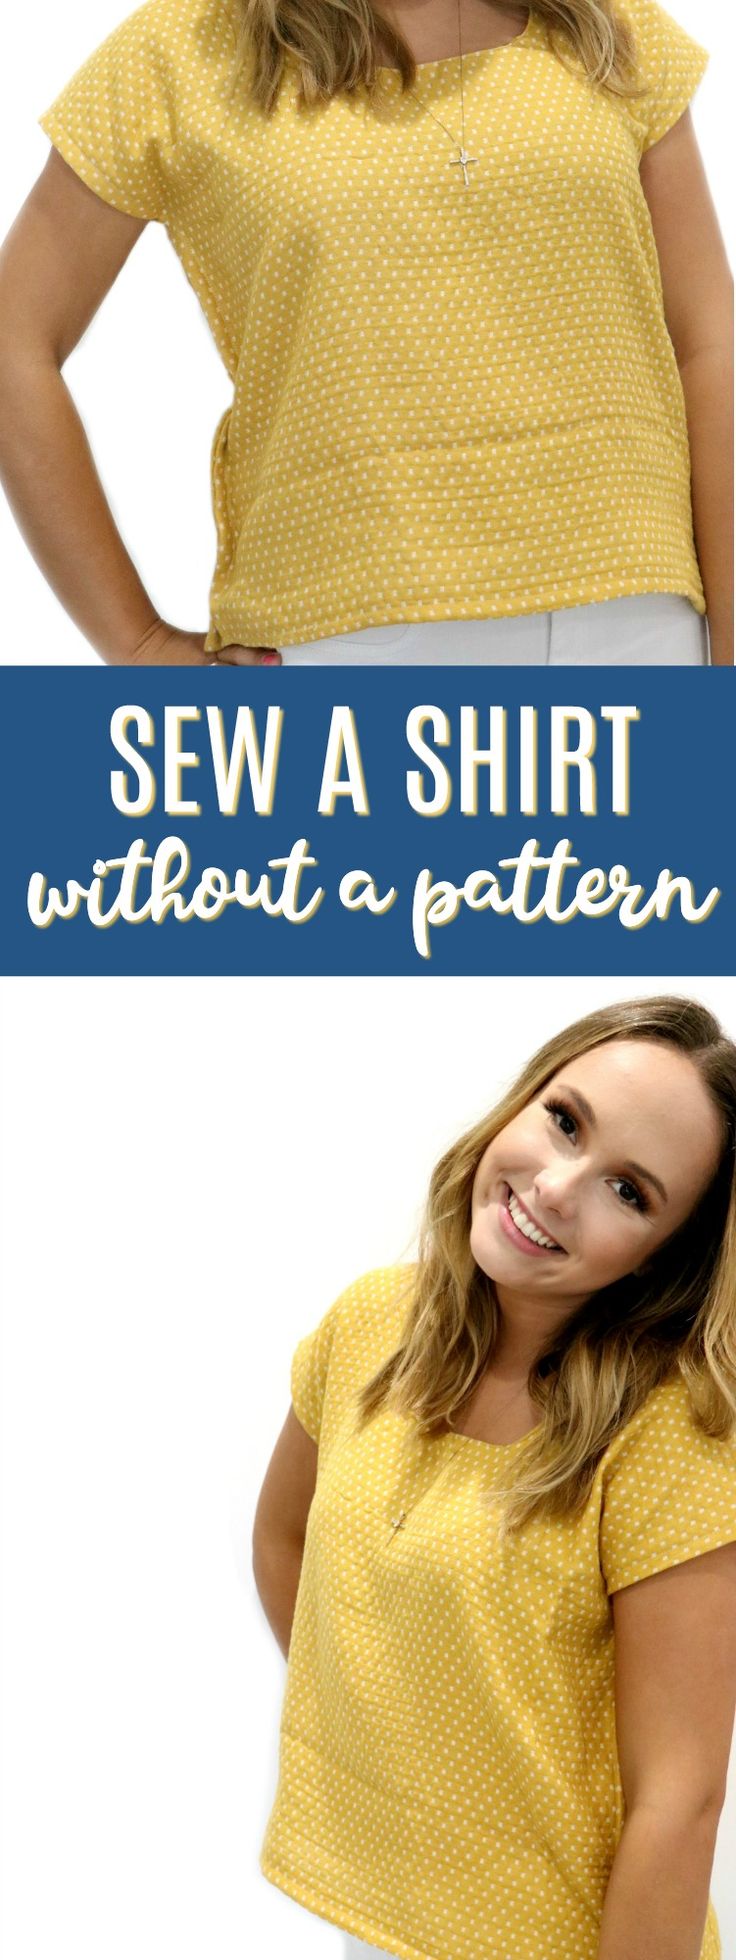 Sewing a shirt without a pattern can be really easy!   Let me show you how! #sew...